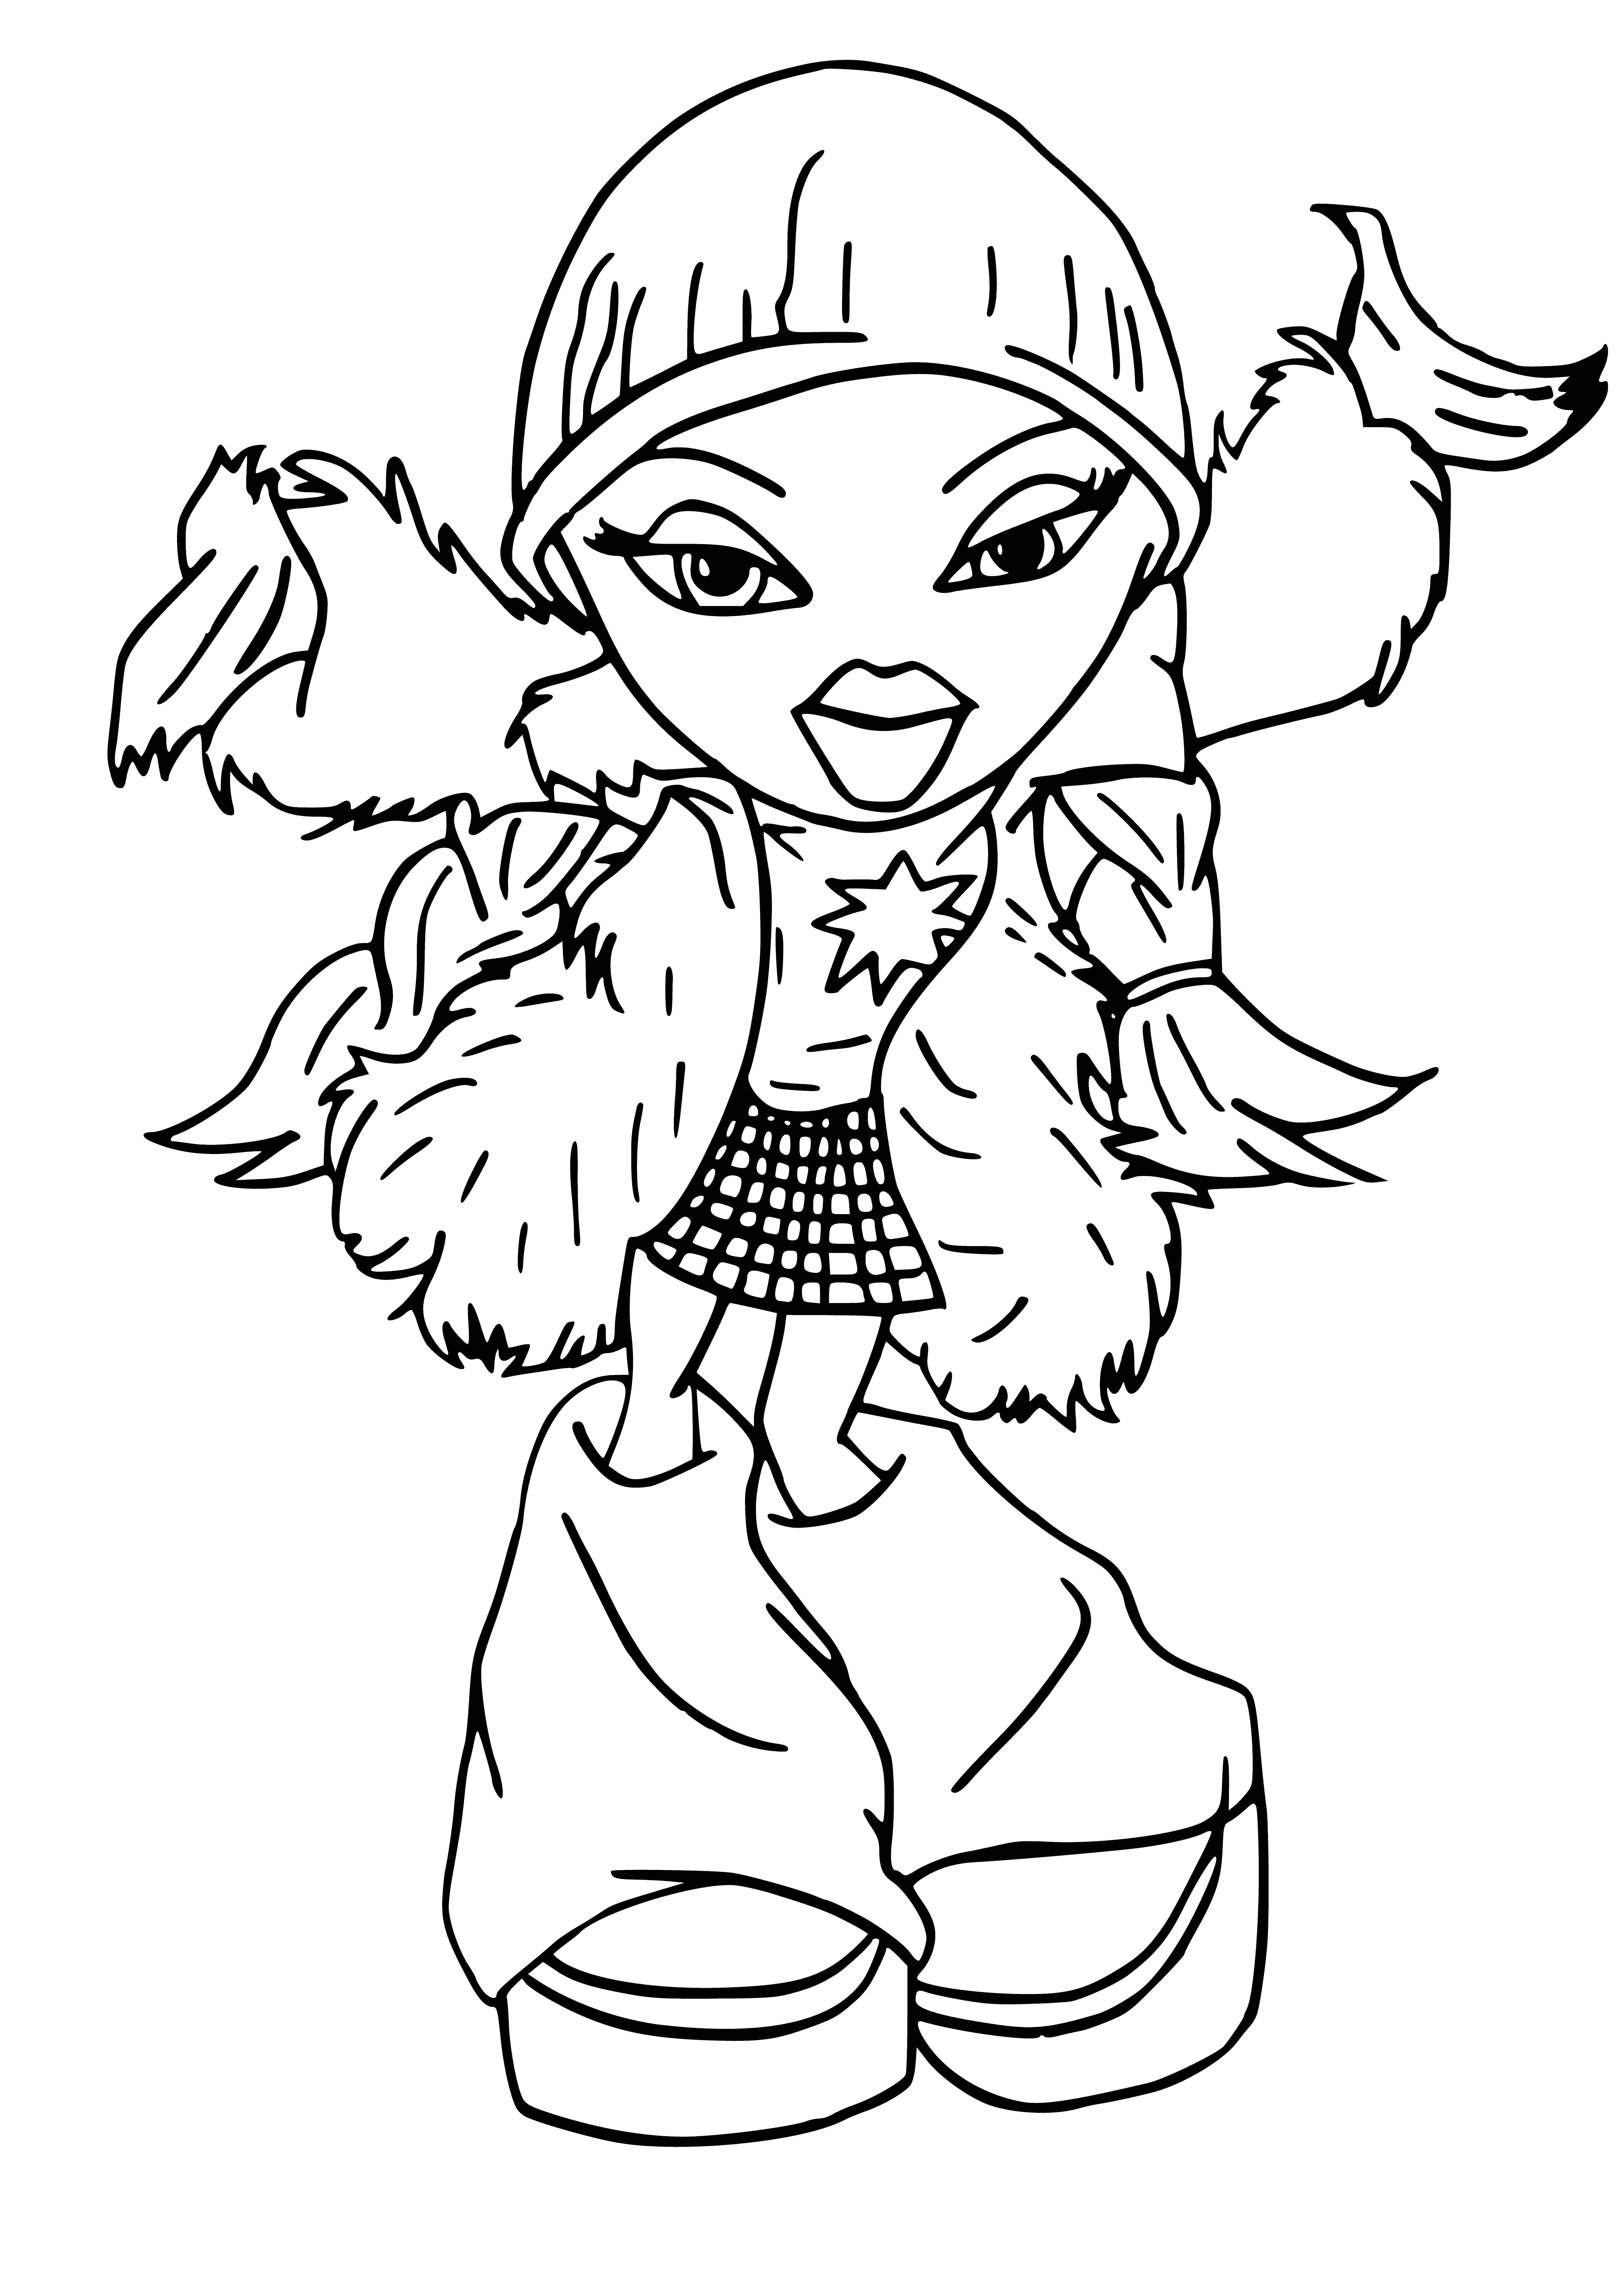 coloring page: Four dolls with different hair colors & outfits. Two hold instruments, one with a mic.